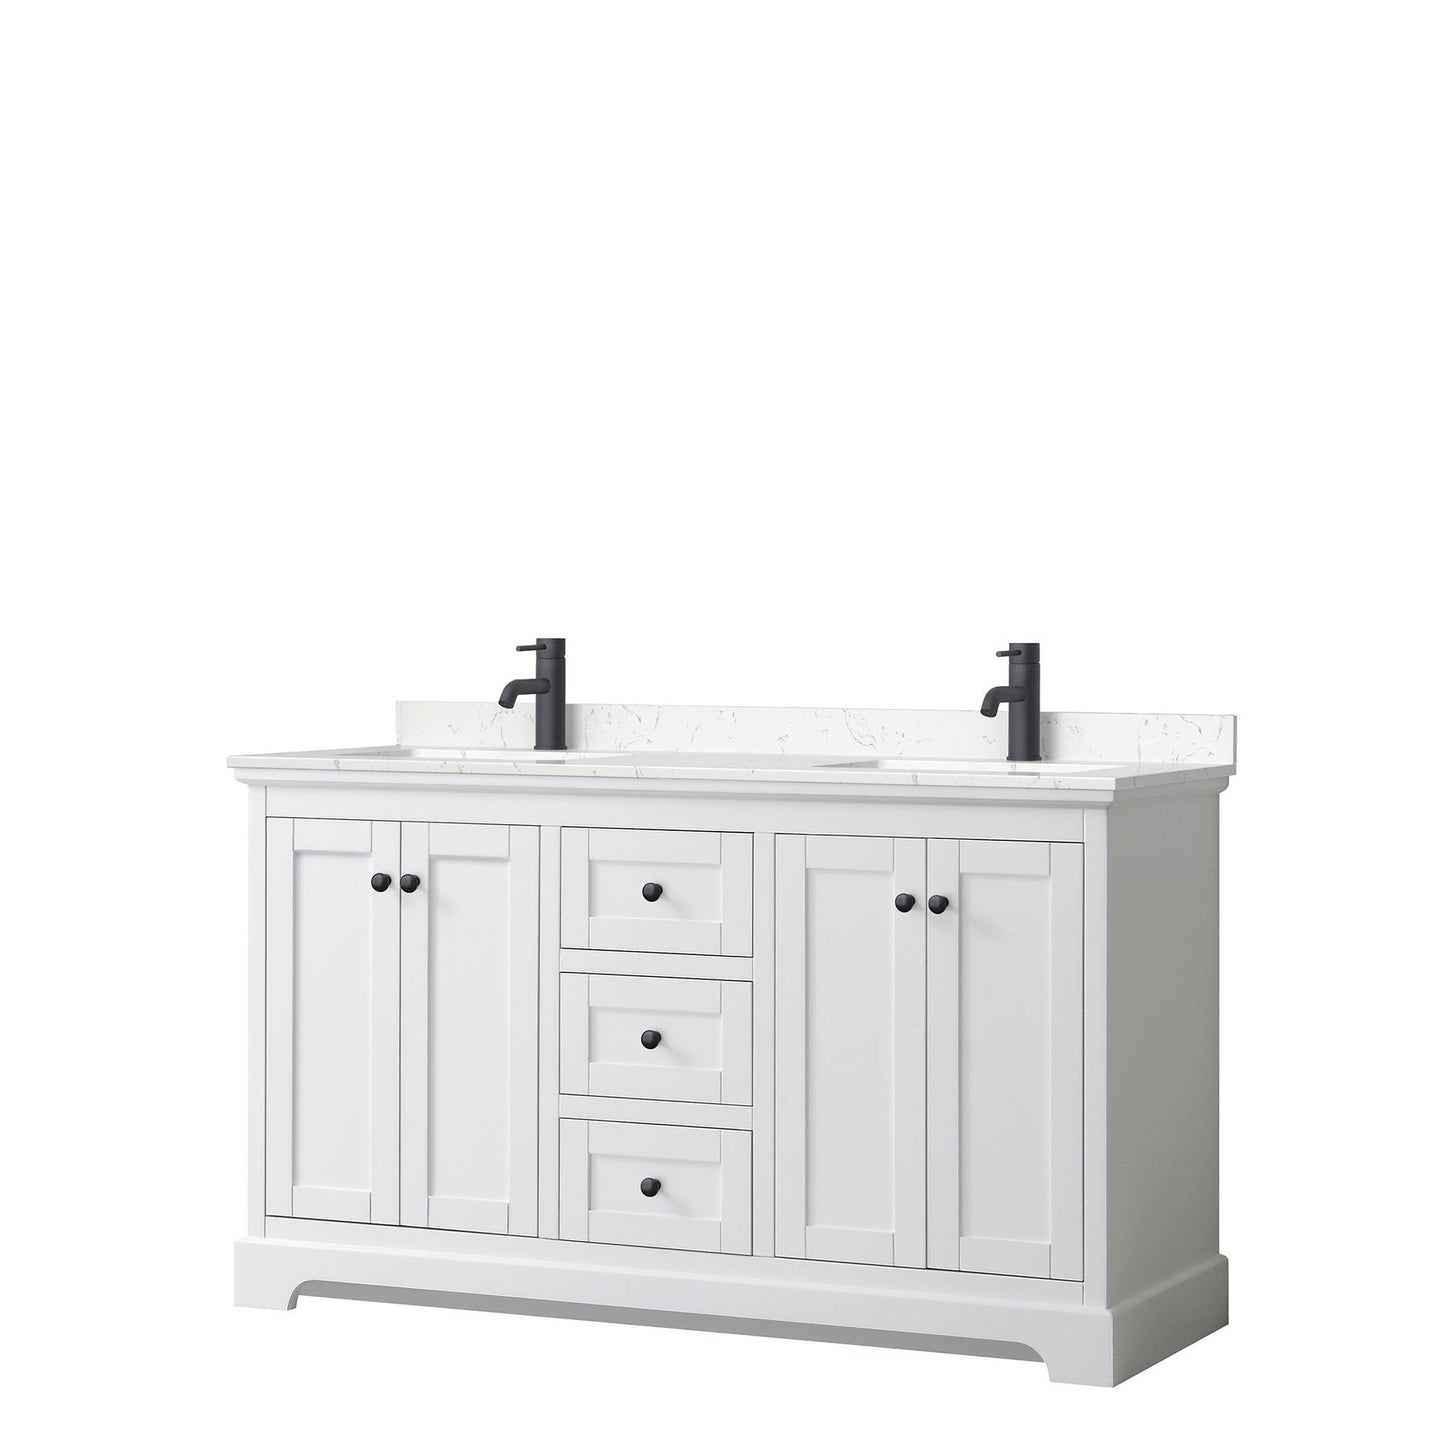 Avery 60" Double Bathroom Vanity in White, Carrara Cultured Marble Countertop, Undermount Square Sinks, Matte Black Trim